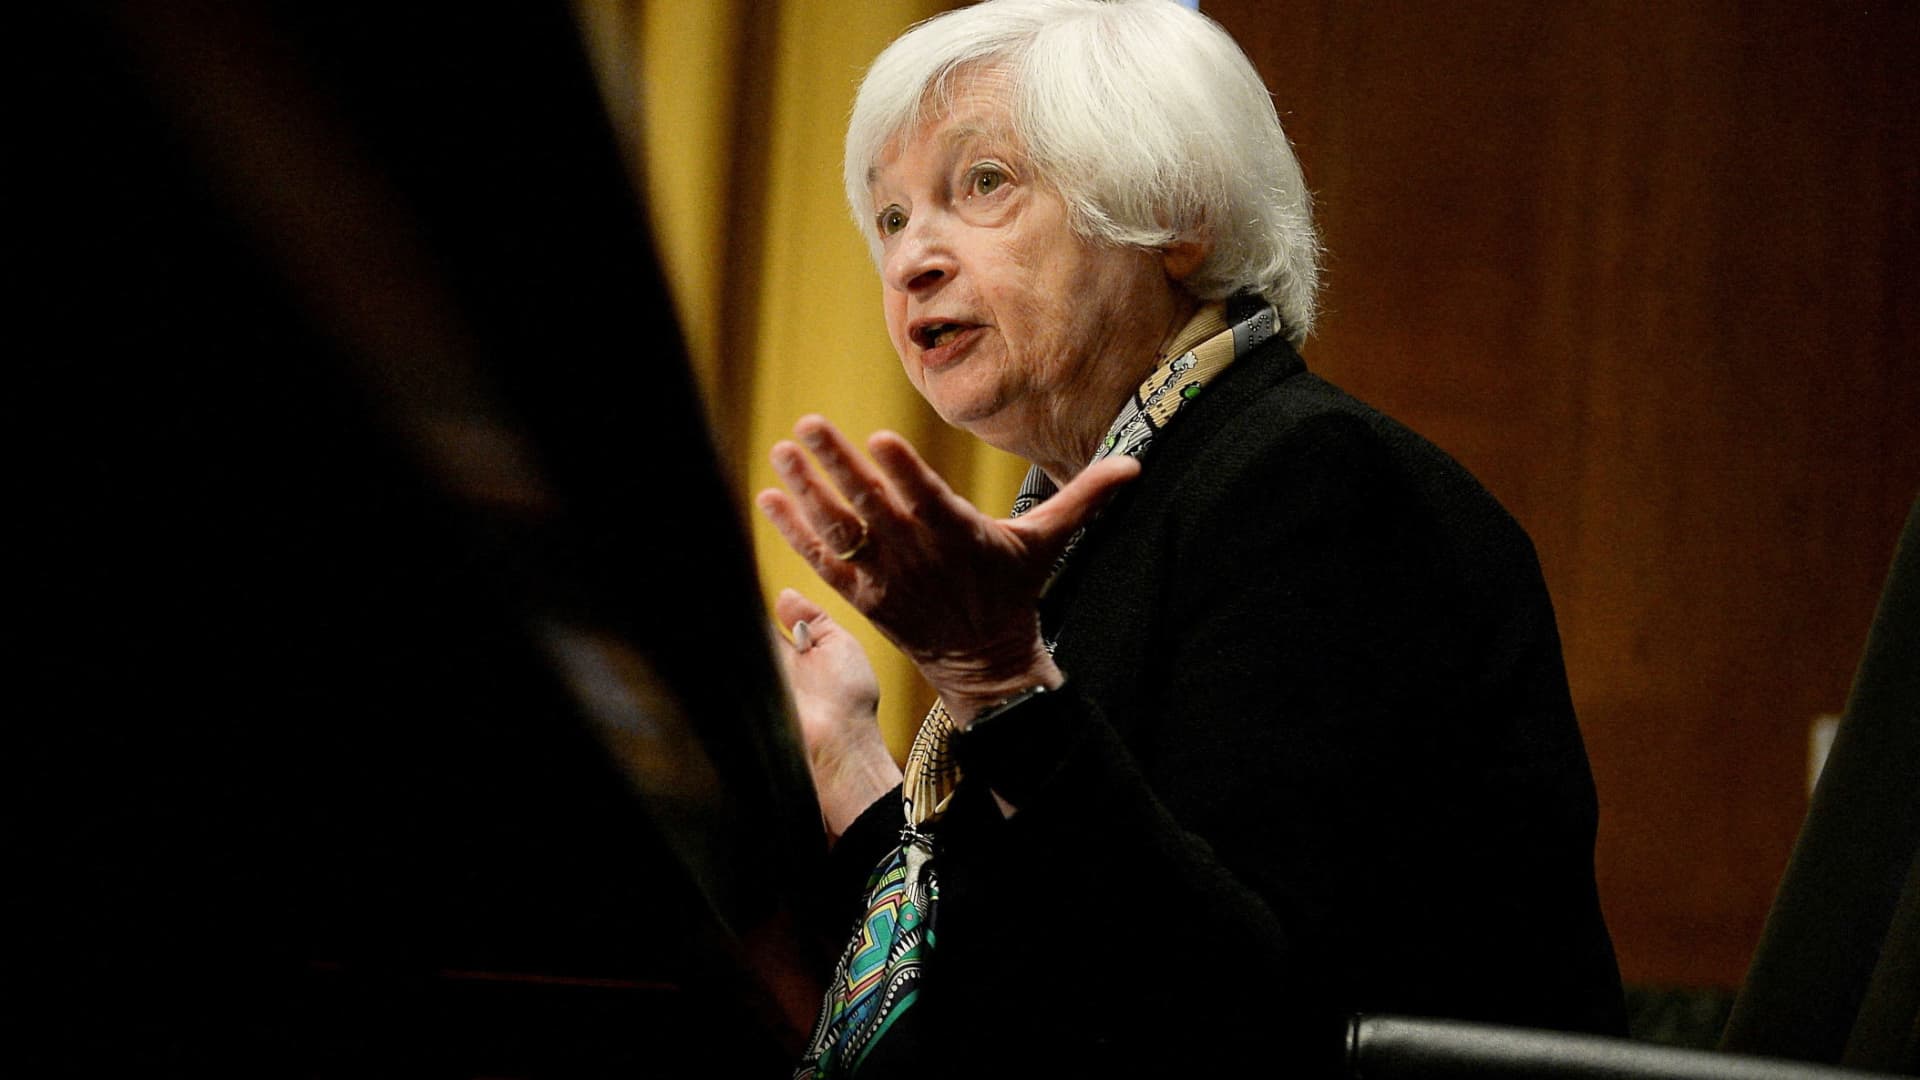 Yellen says Treasury is ready to take ‘additional actions if warranted’ to stabilize banks